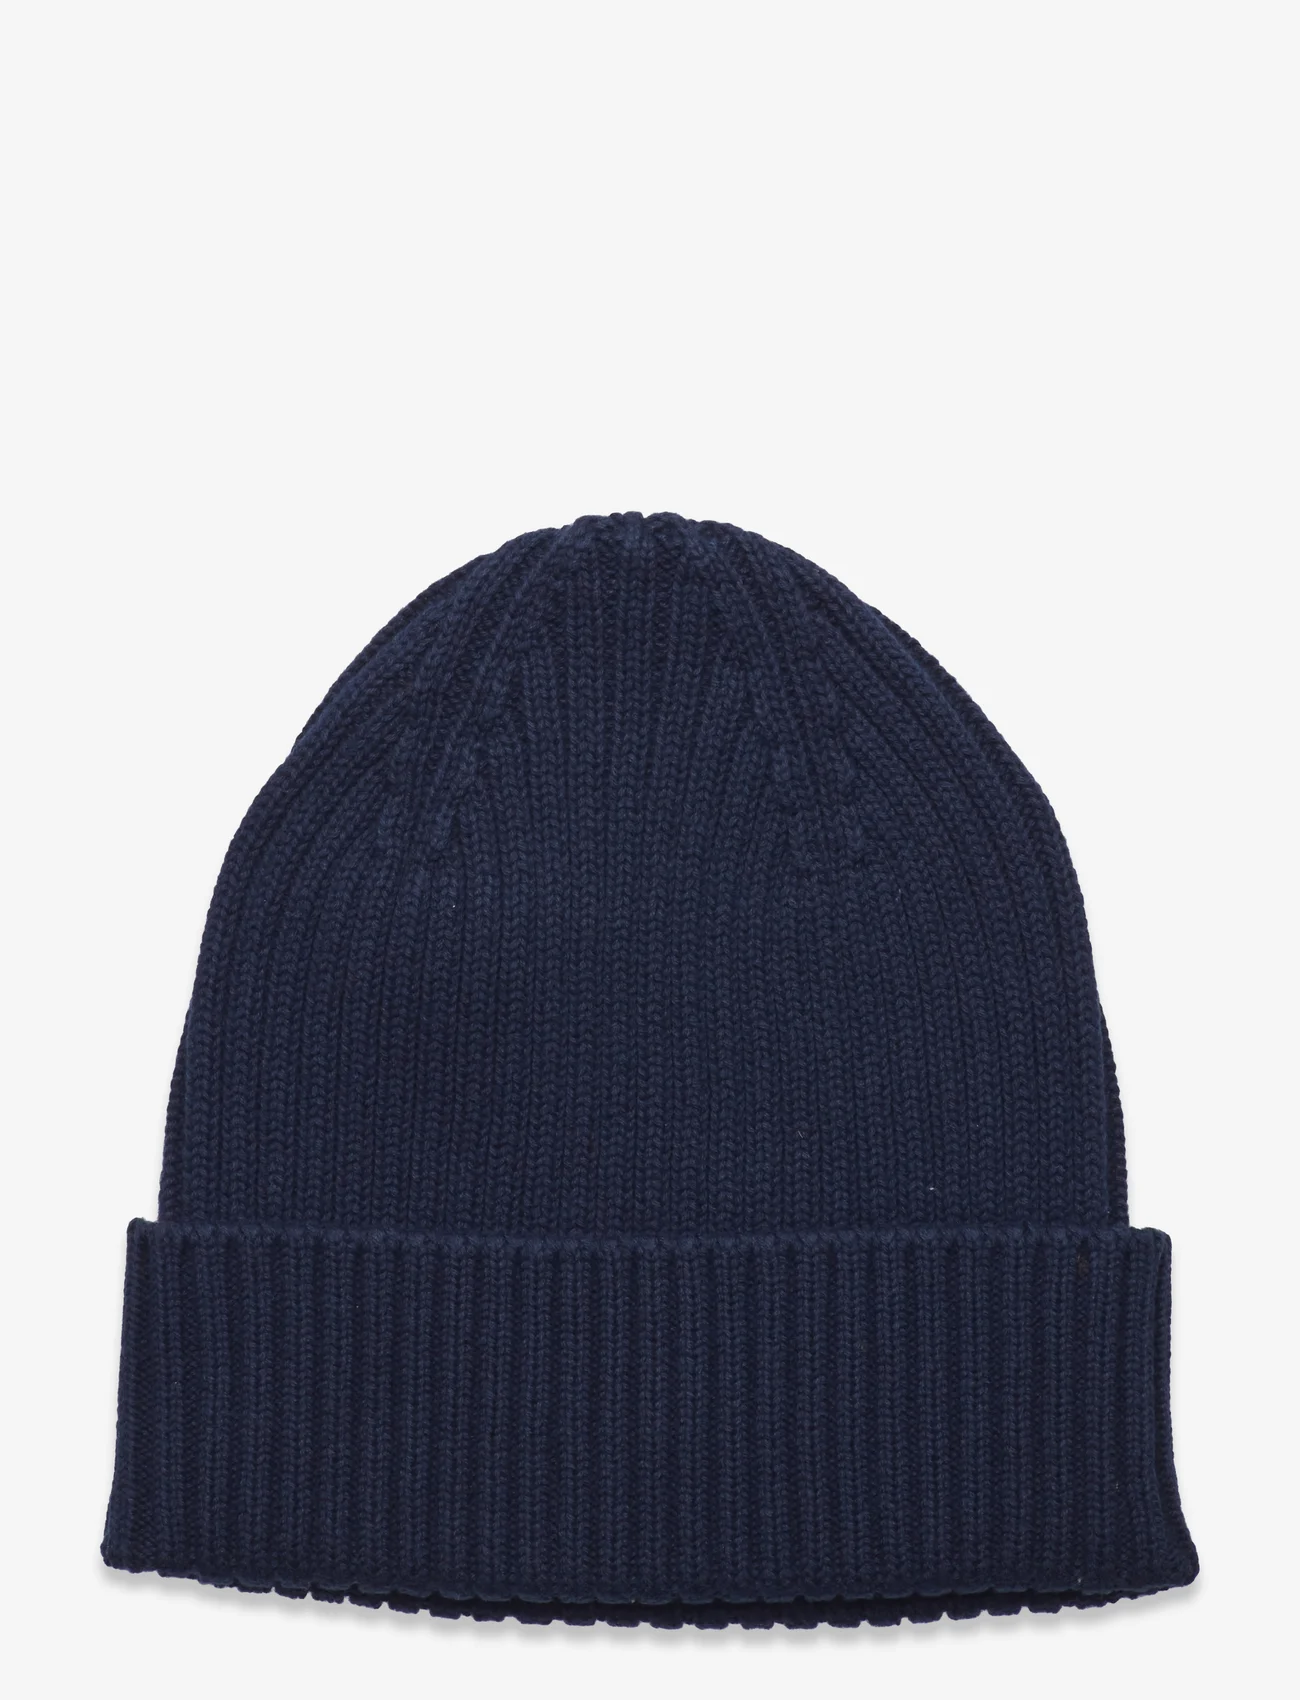 Copenhagen Colors - COTTON KNITTED CLASSIC BEANIE - madalaimad hinnad - navy - 1